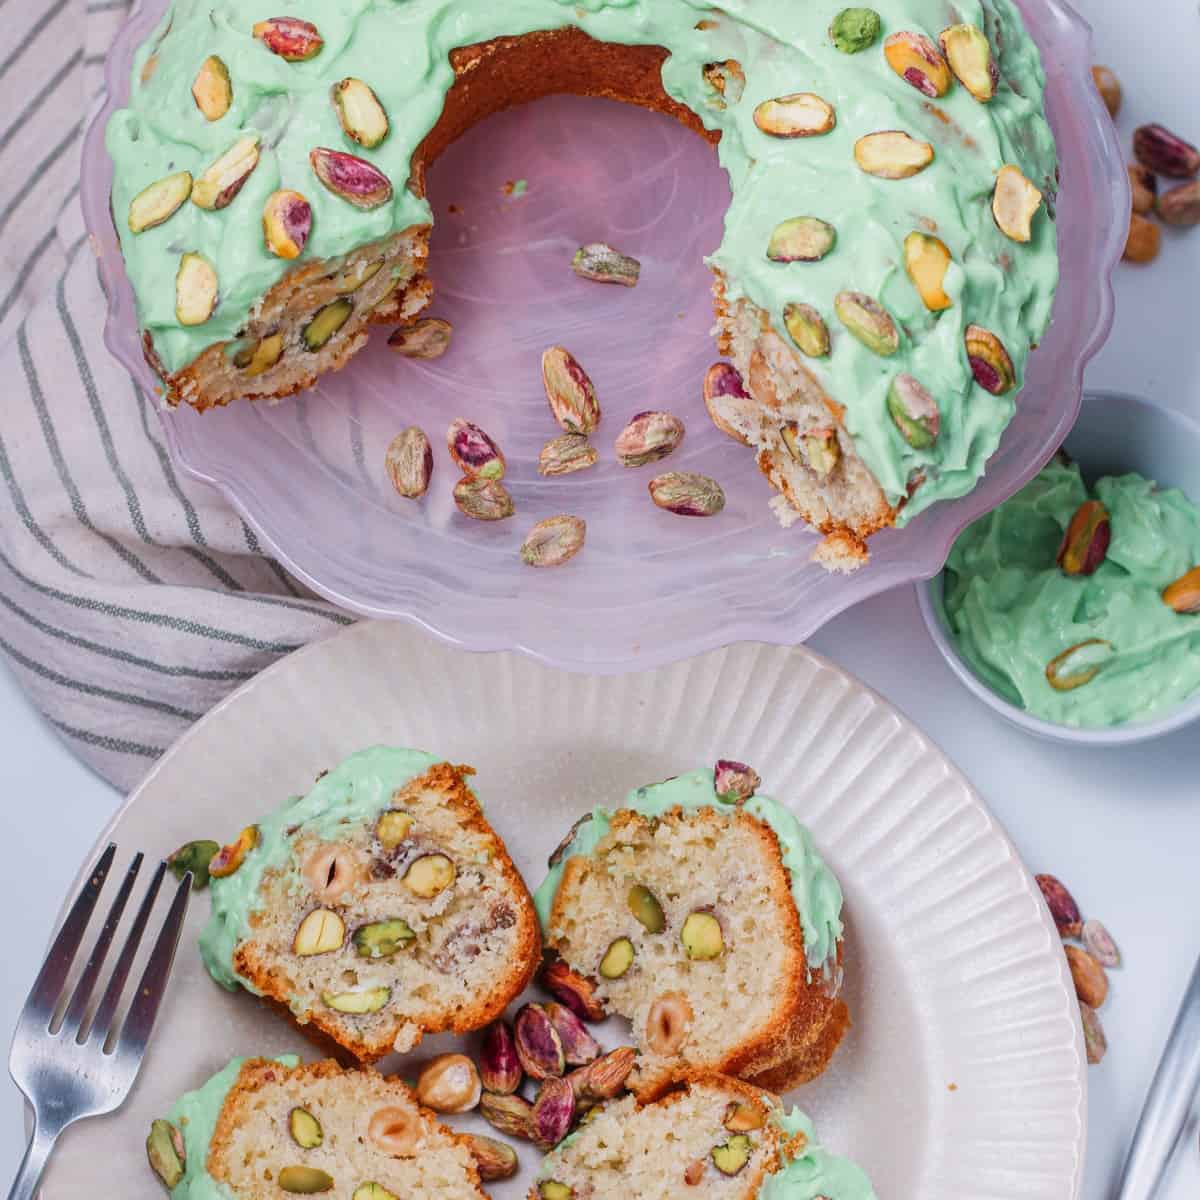 A close-up photo of a moist pistachio cake on a white plate. The cake is light and fluffy, with a light green swirl visible throughout the crumb. It has a golden brown, slightly cracked top sprinkled with chopped pistachios. A thick glaze coats the top of the cake, dripping slightly down the sides. A single whole pistachio nut sits on the edge of the plate for garnish